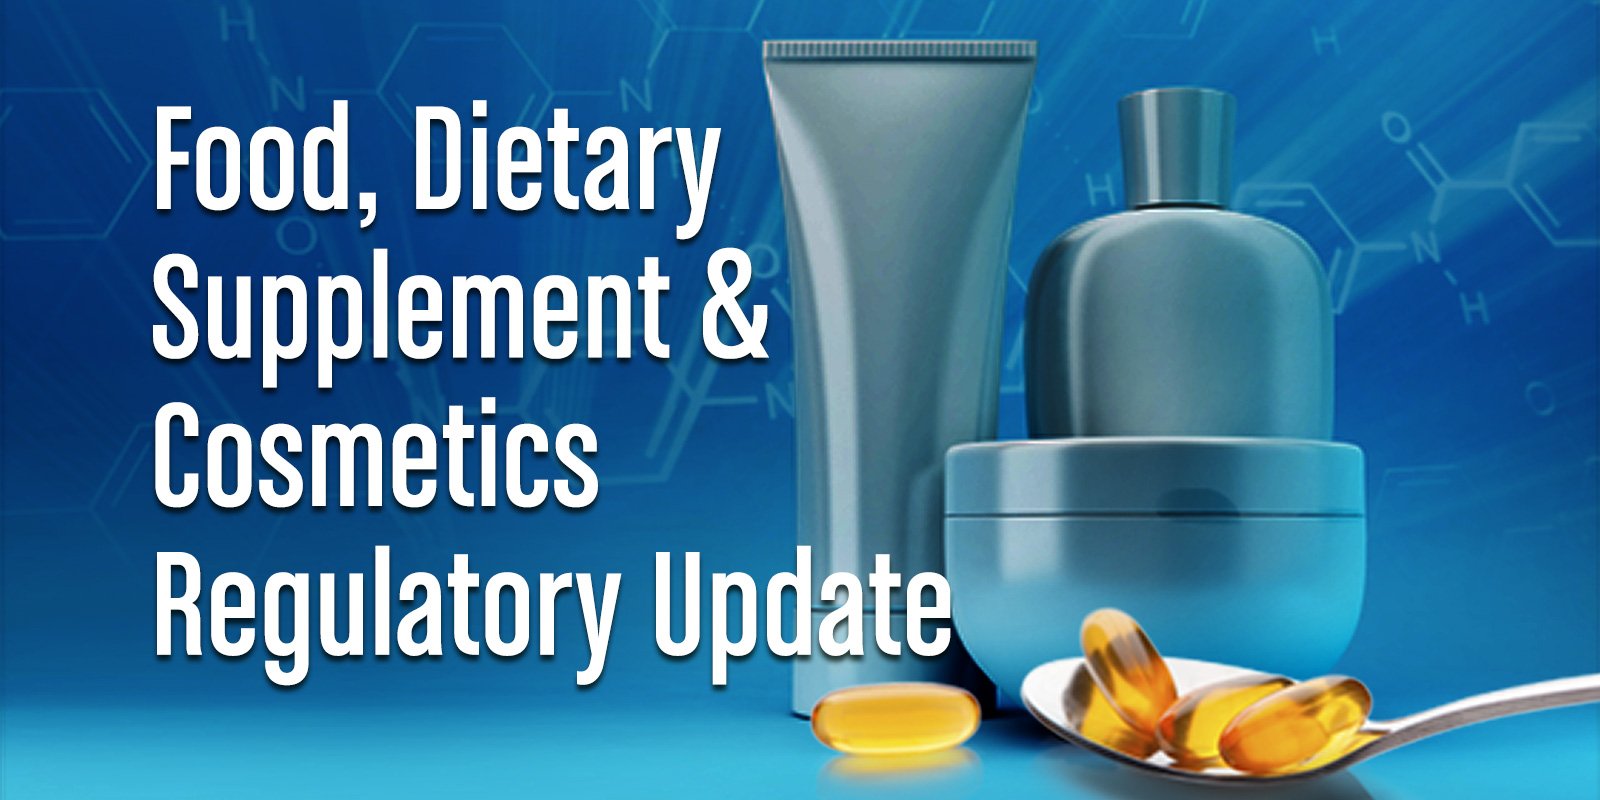 Food, Dietary Supplement & Cosmetics Update | Vol. IV, Issue 5